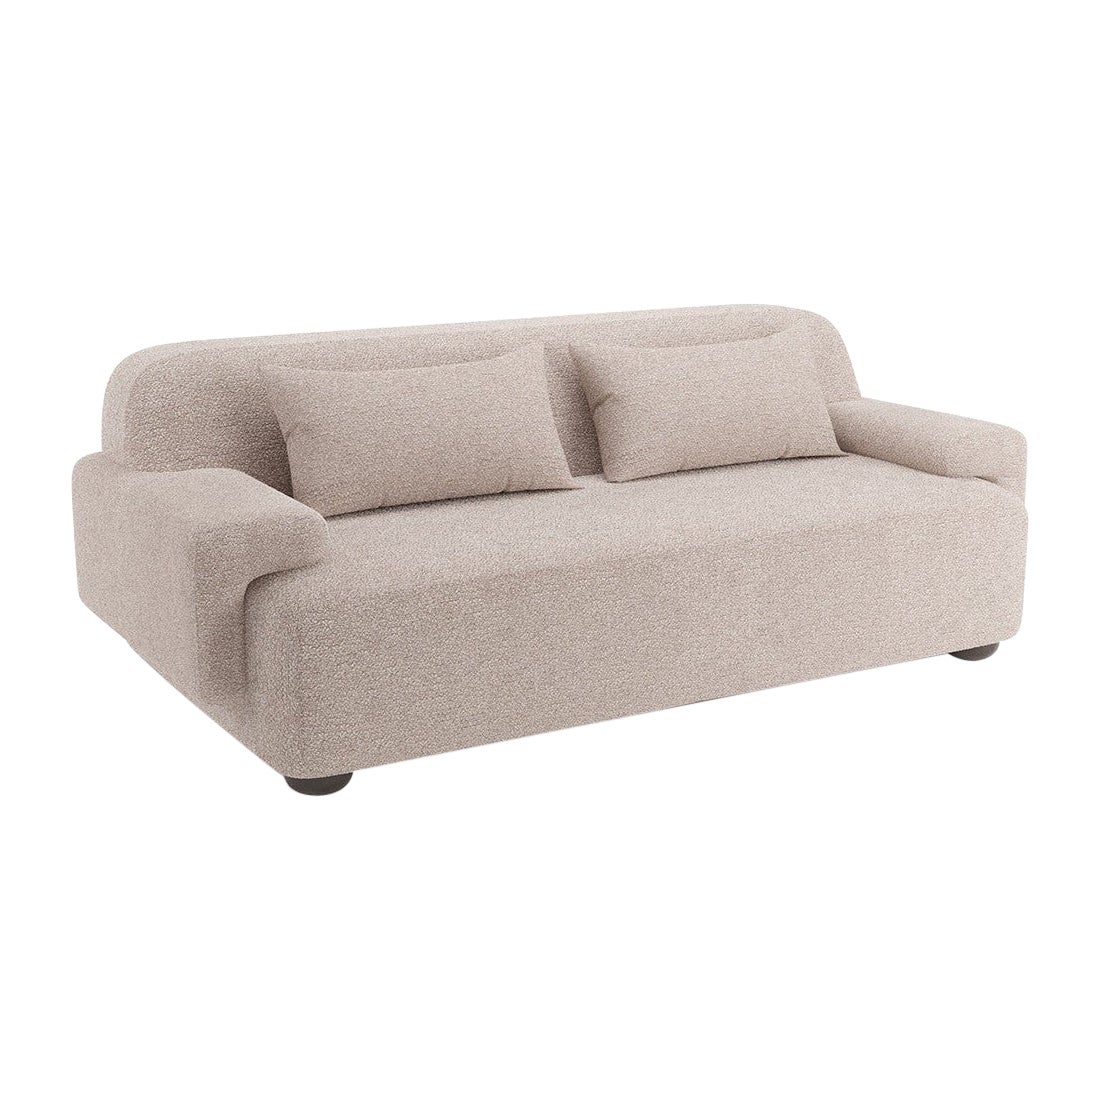 Popus Editions Lena 2.5 Seater Sofa in Mole Taupe Malmoe Terry Upholstery